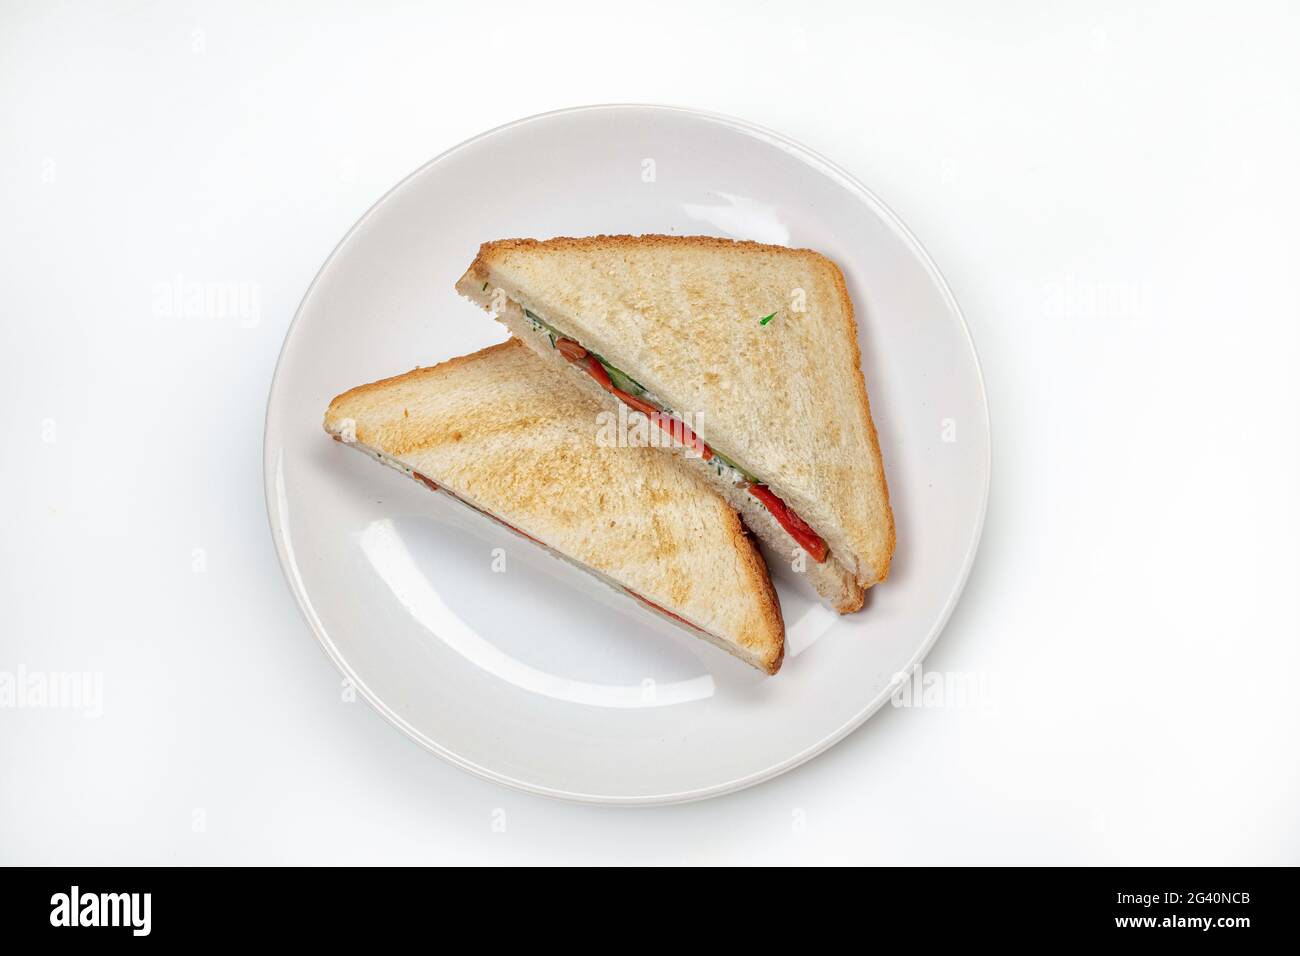 Sandwiches With Red Fish Stock Photo